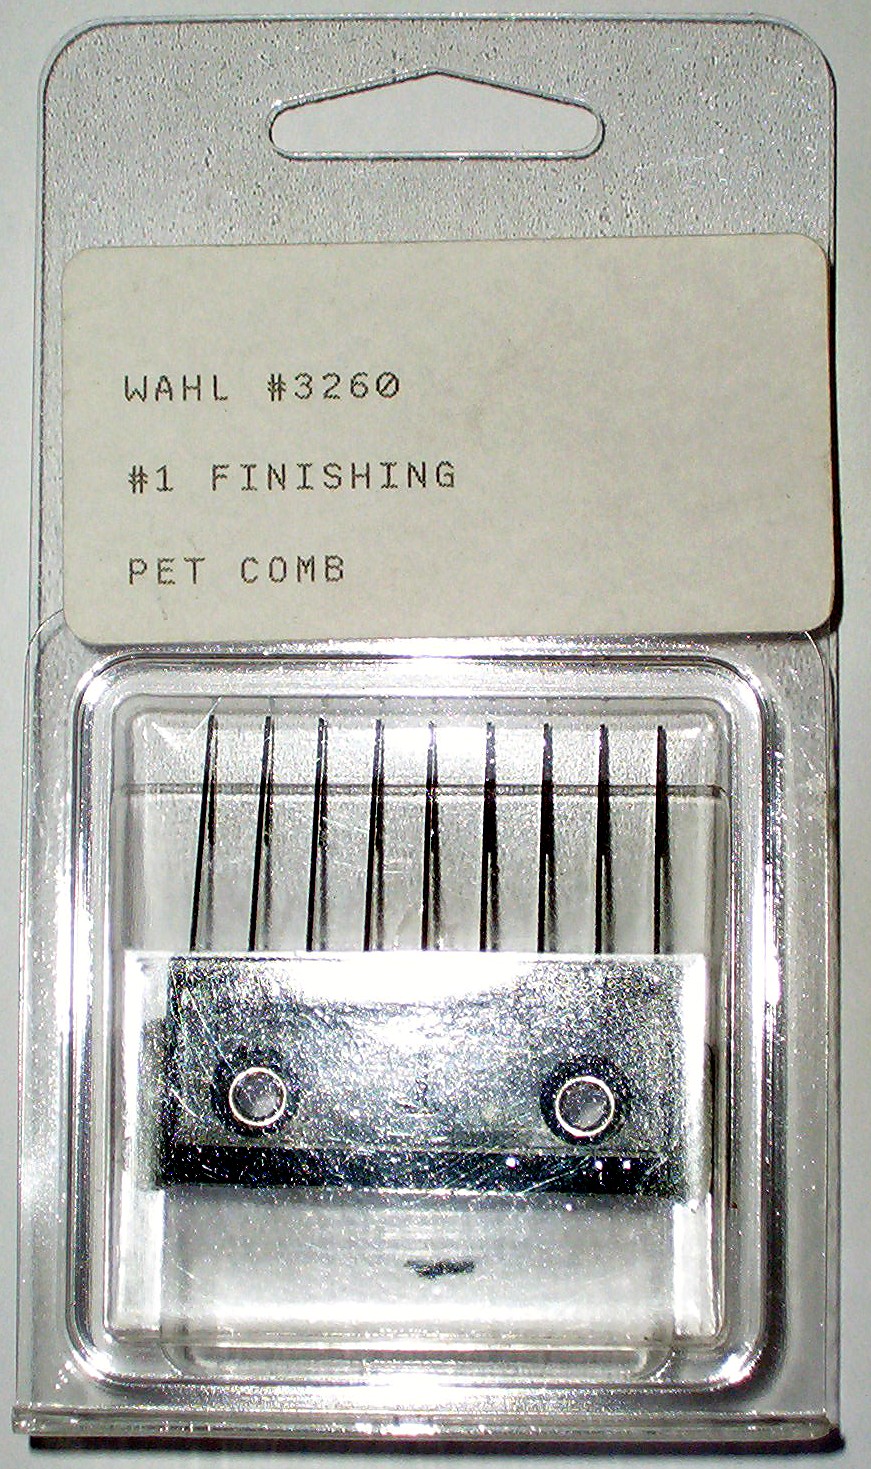 wahl stainless steel clipper guards